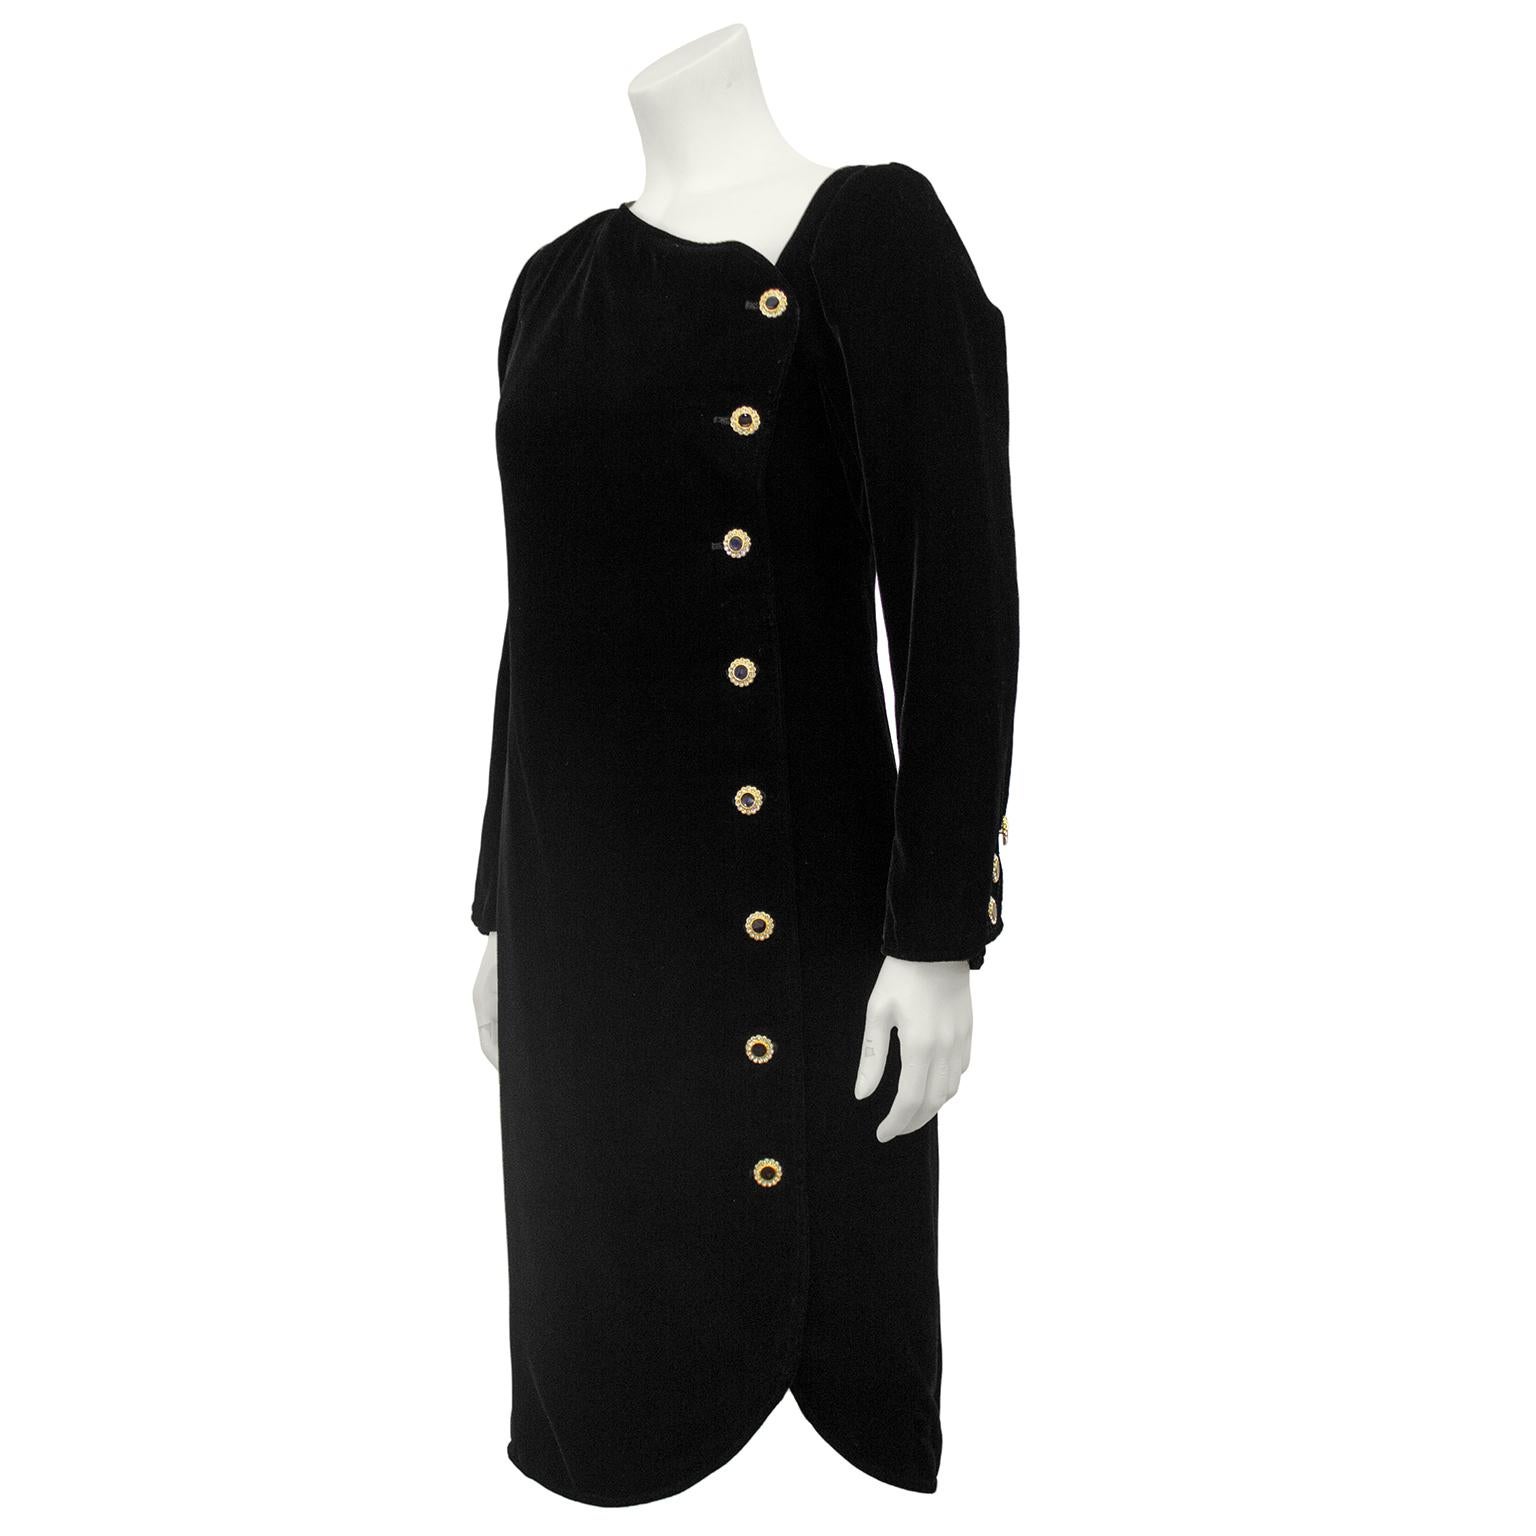 1980s Yves Saint Laurent Rive Gauche jet black cut velvet cocktail dress. Asymmetrical neckline with long sleeves and rhinestone embellished gold and black buttons. Slightly fitted through the waist and features a tulip hem. Excellent vintage